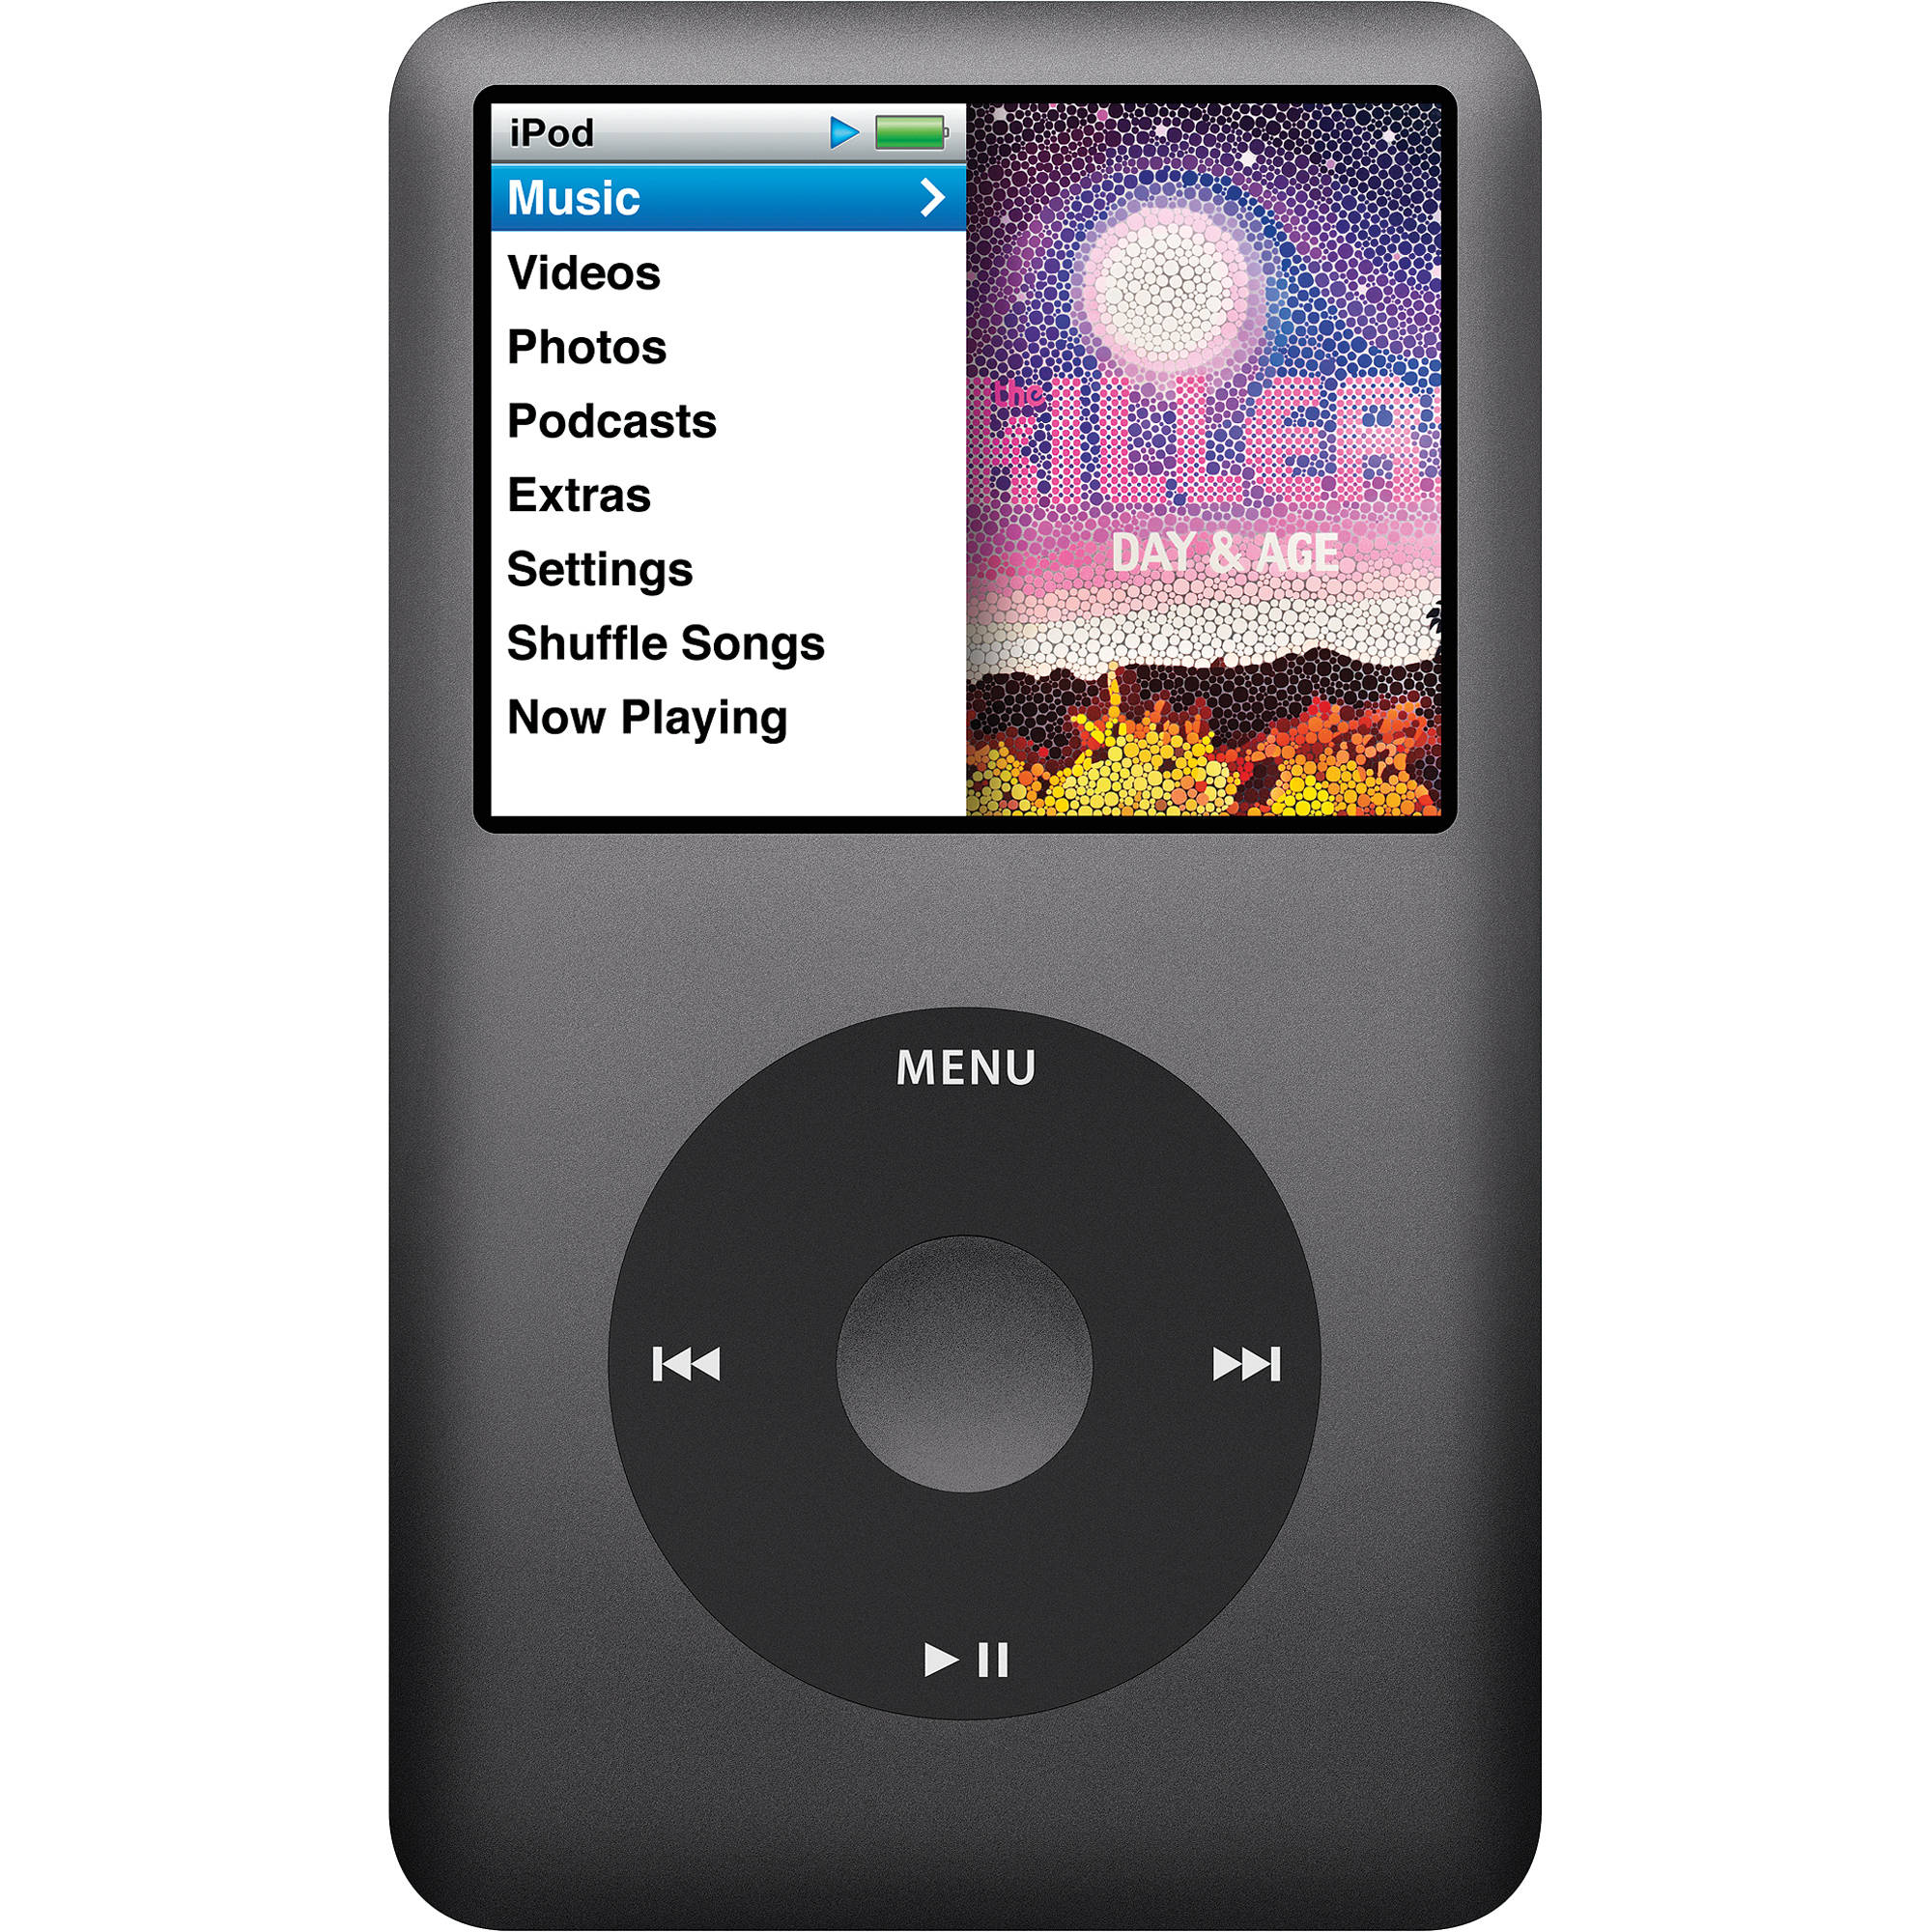 download the new version for ipod WindowTop 5.22.4